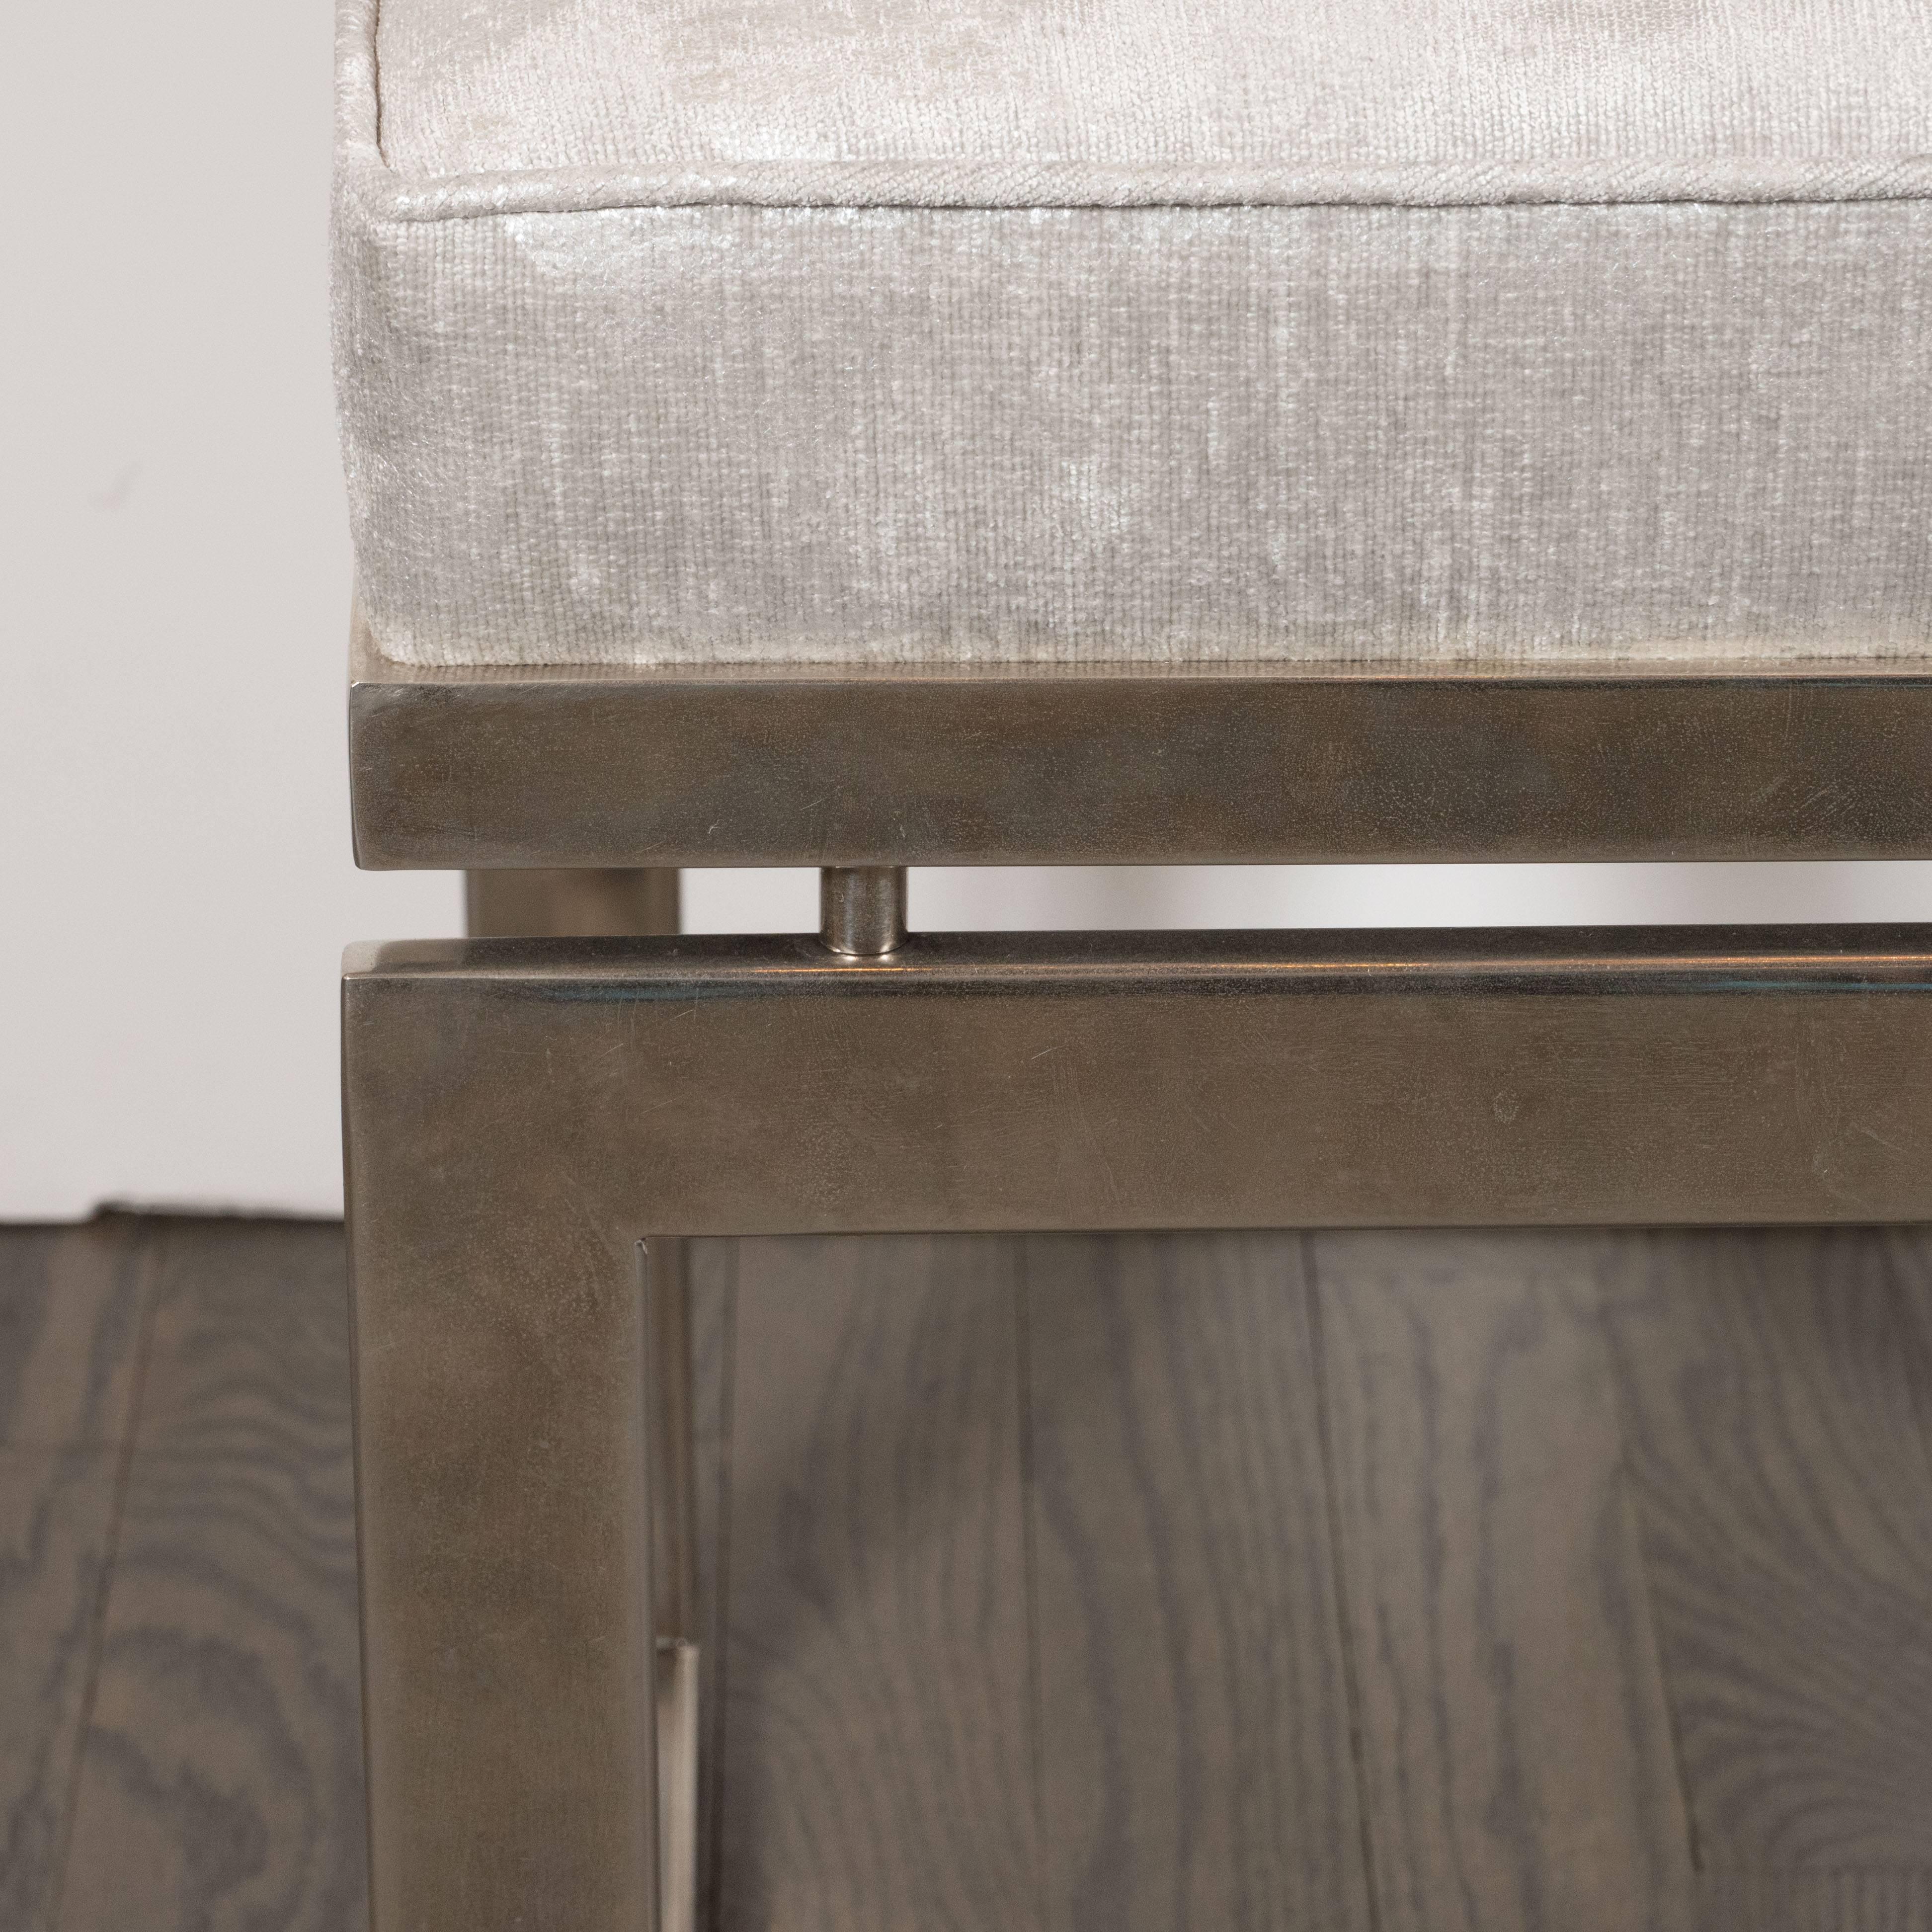 Late 20th Century Pair of Mid-Century Modernist Chrome Stools with Textured Metallic Upholstery